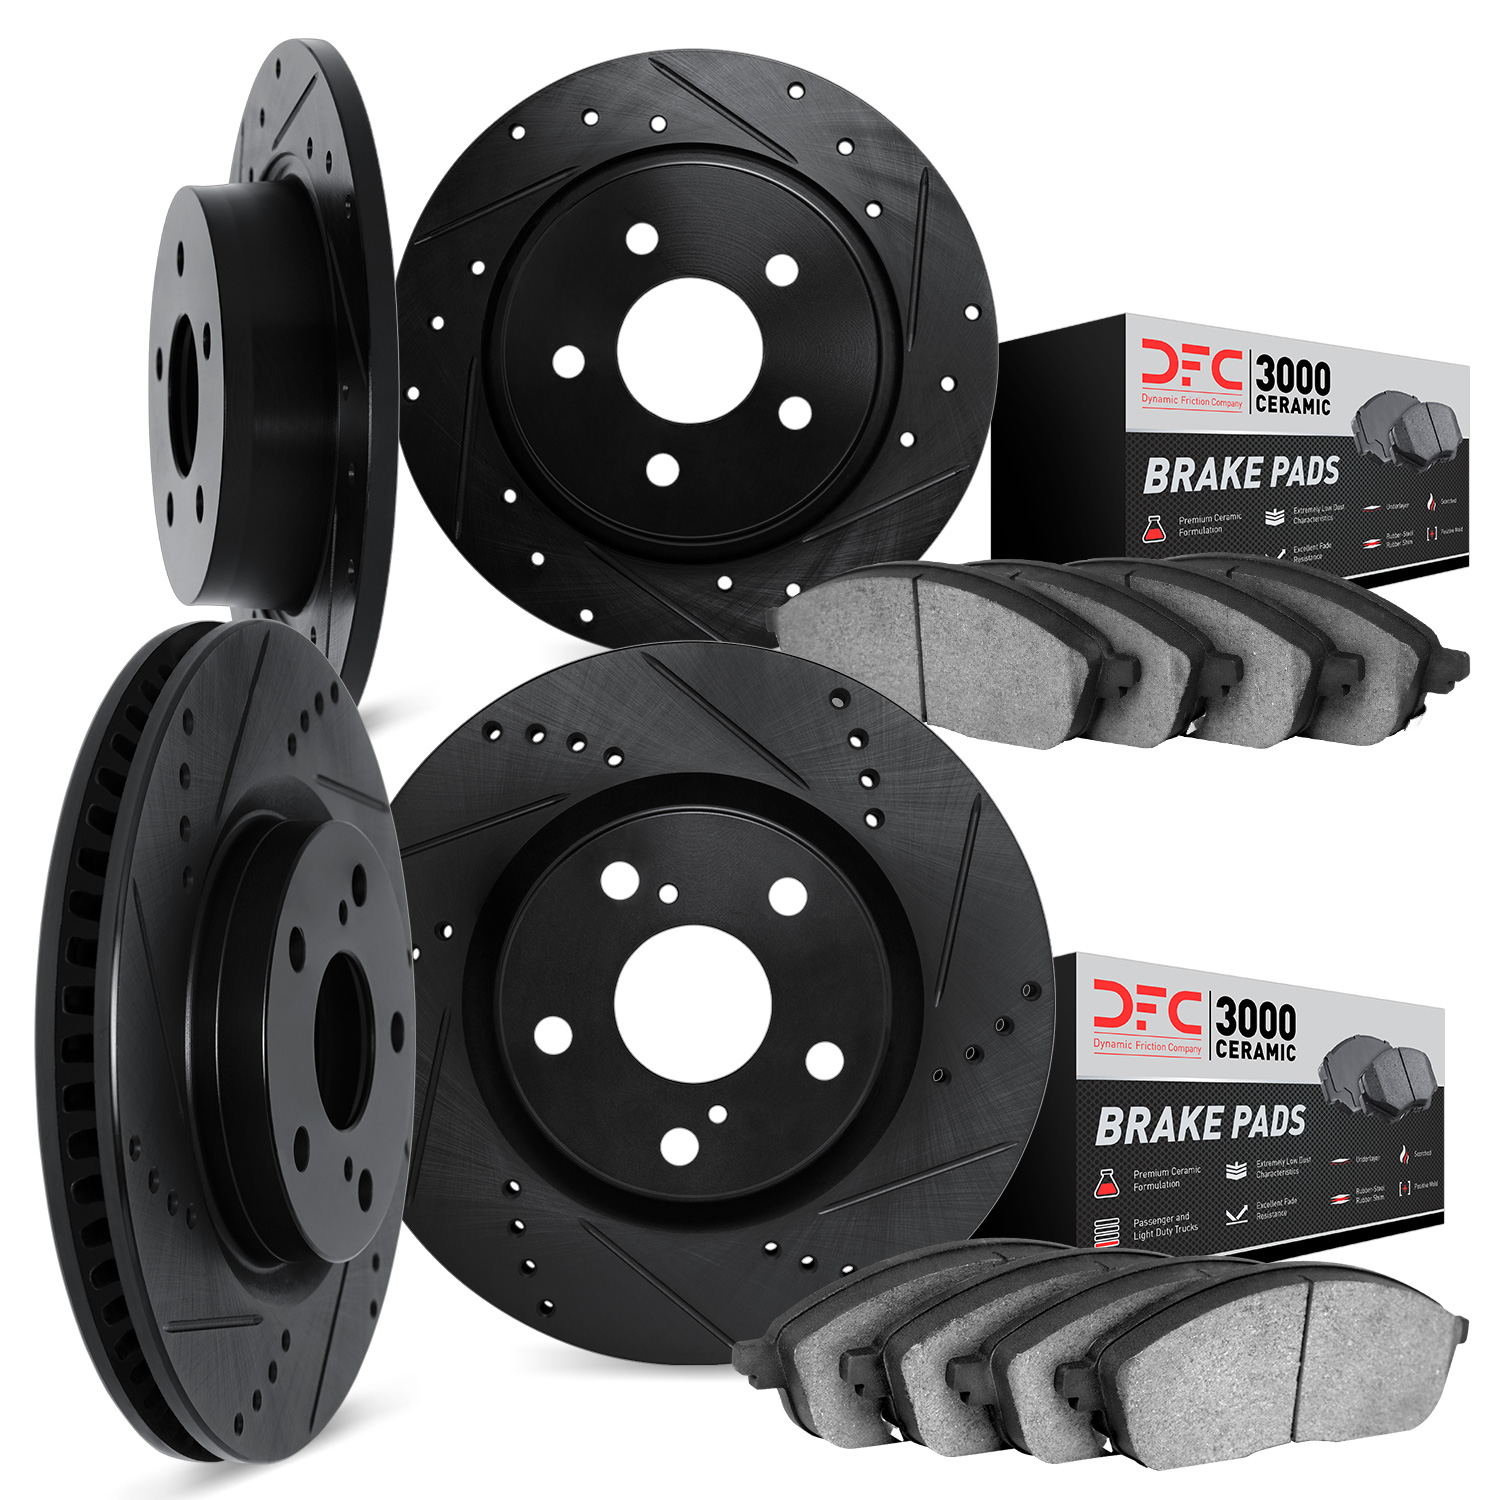 8304-59032 Drilled/Slotted Brake Rotors with 3000-Series Ceramic Brake Pads Kit [Black], 2013-2013 Acura/Honda, Position: Front